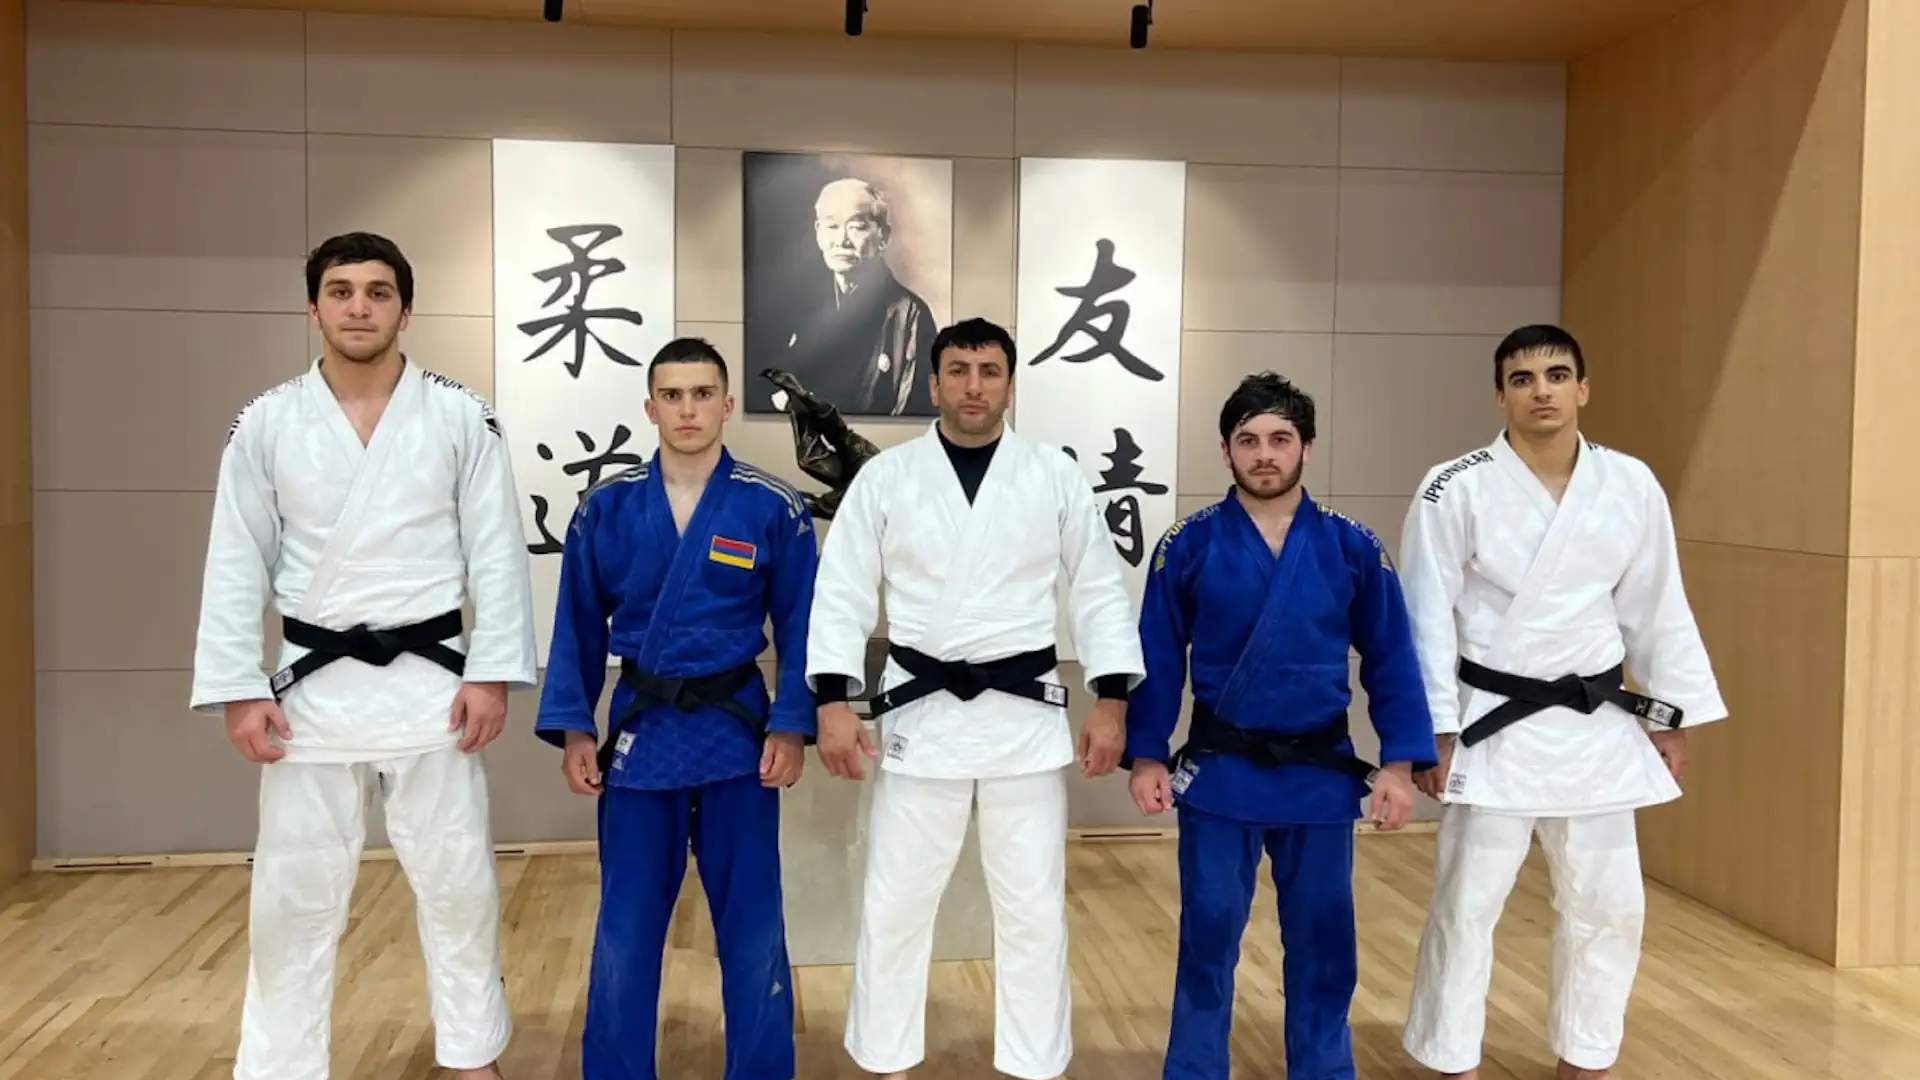 Sauad of the Armenian National Team for the European Judo Championship 2024